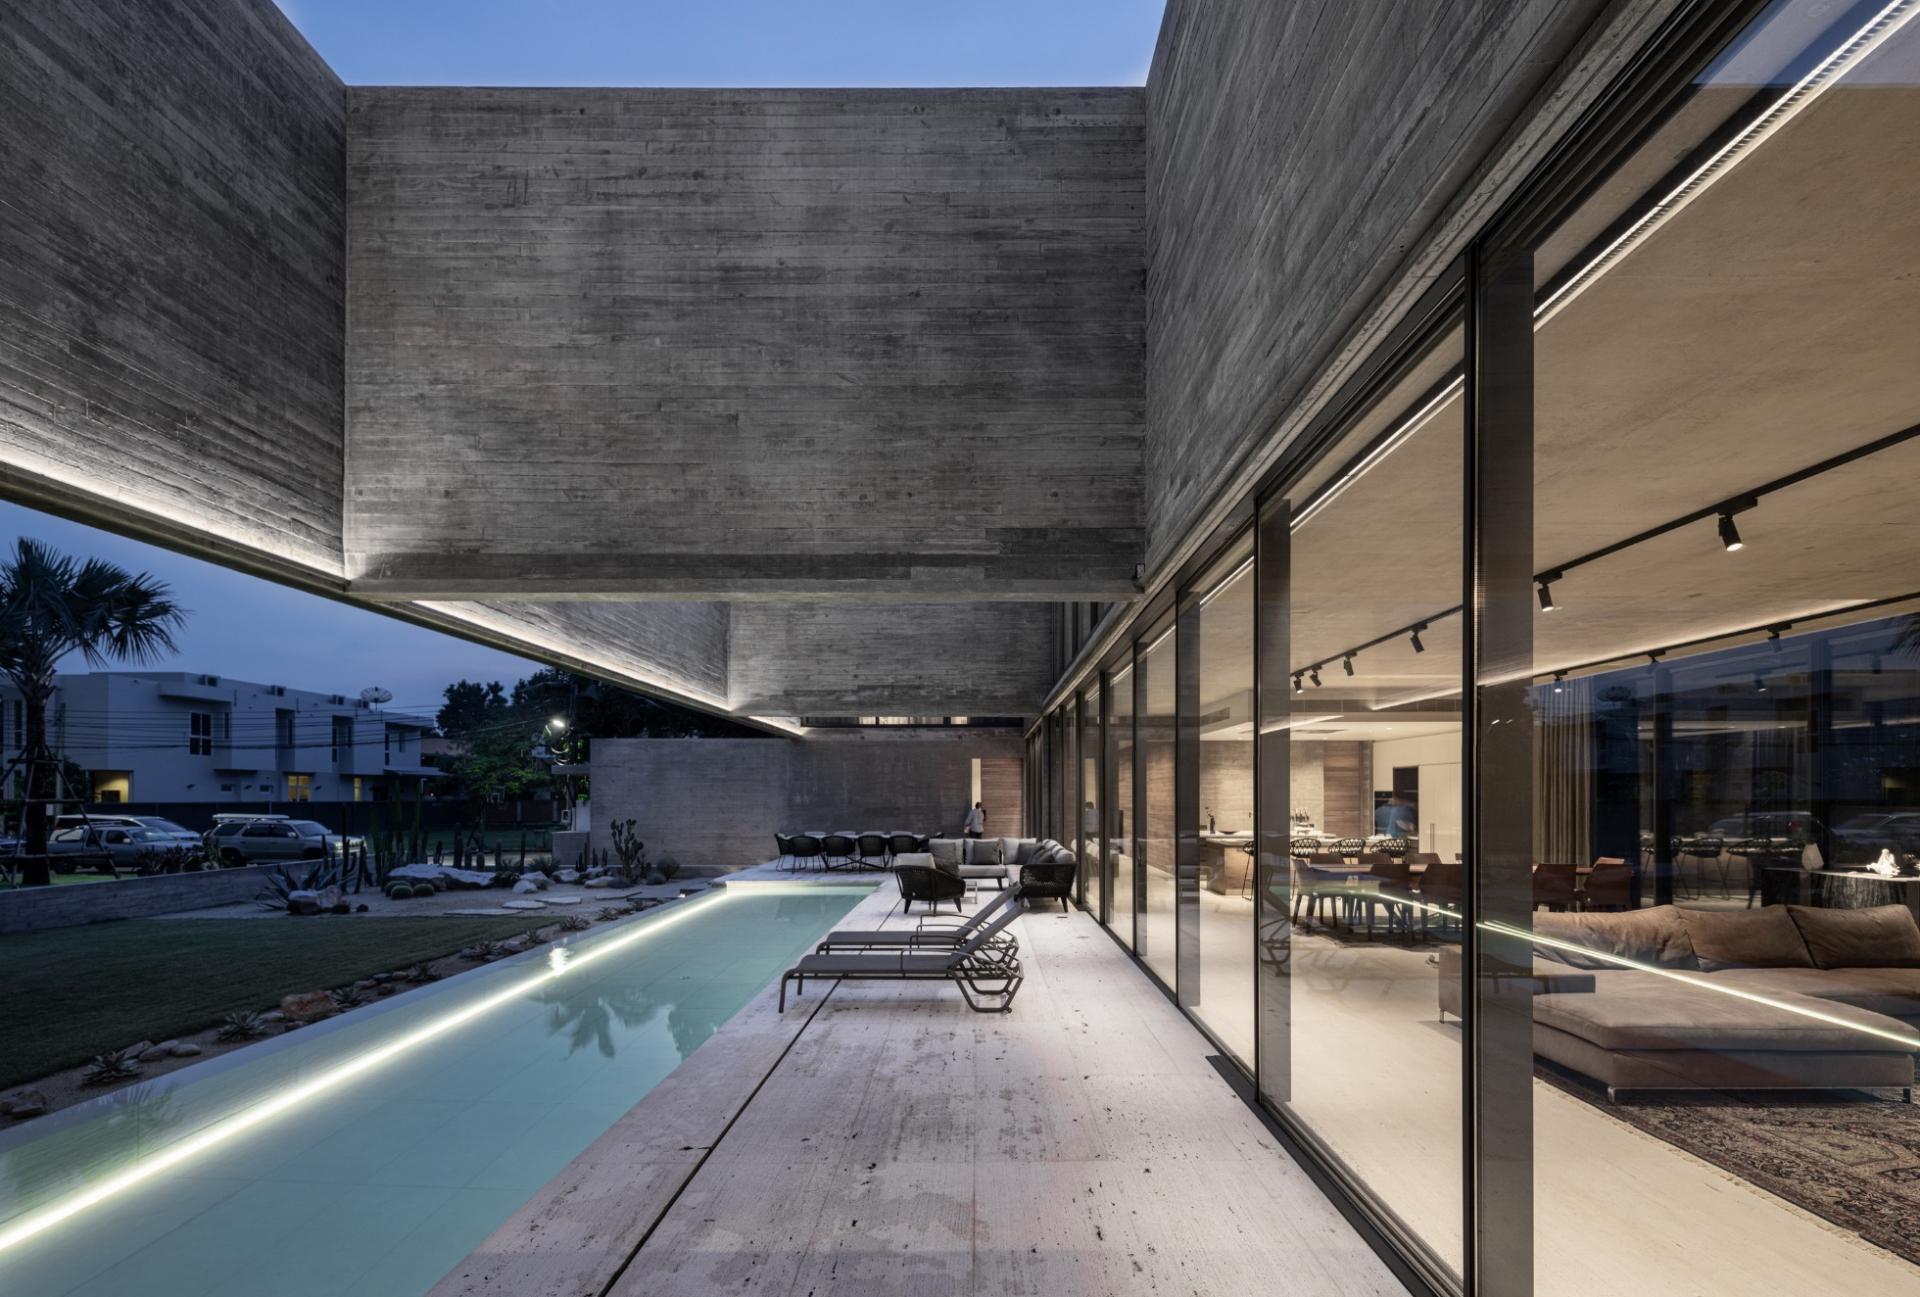 This monolithic Thailand-based residence resembles brutalist architecture